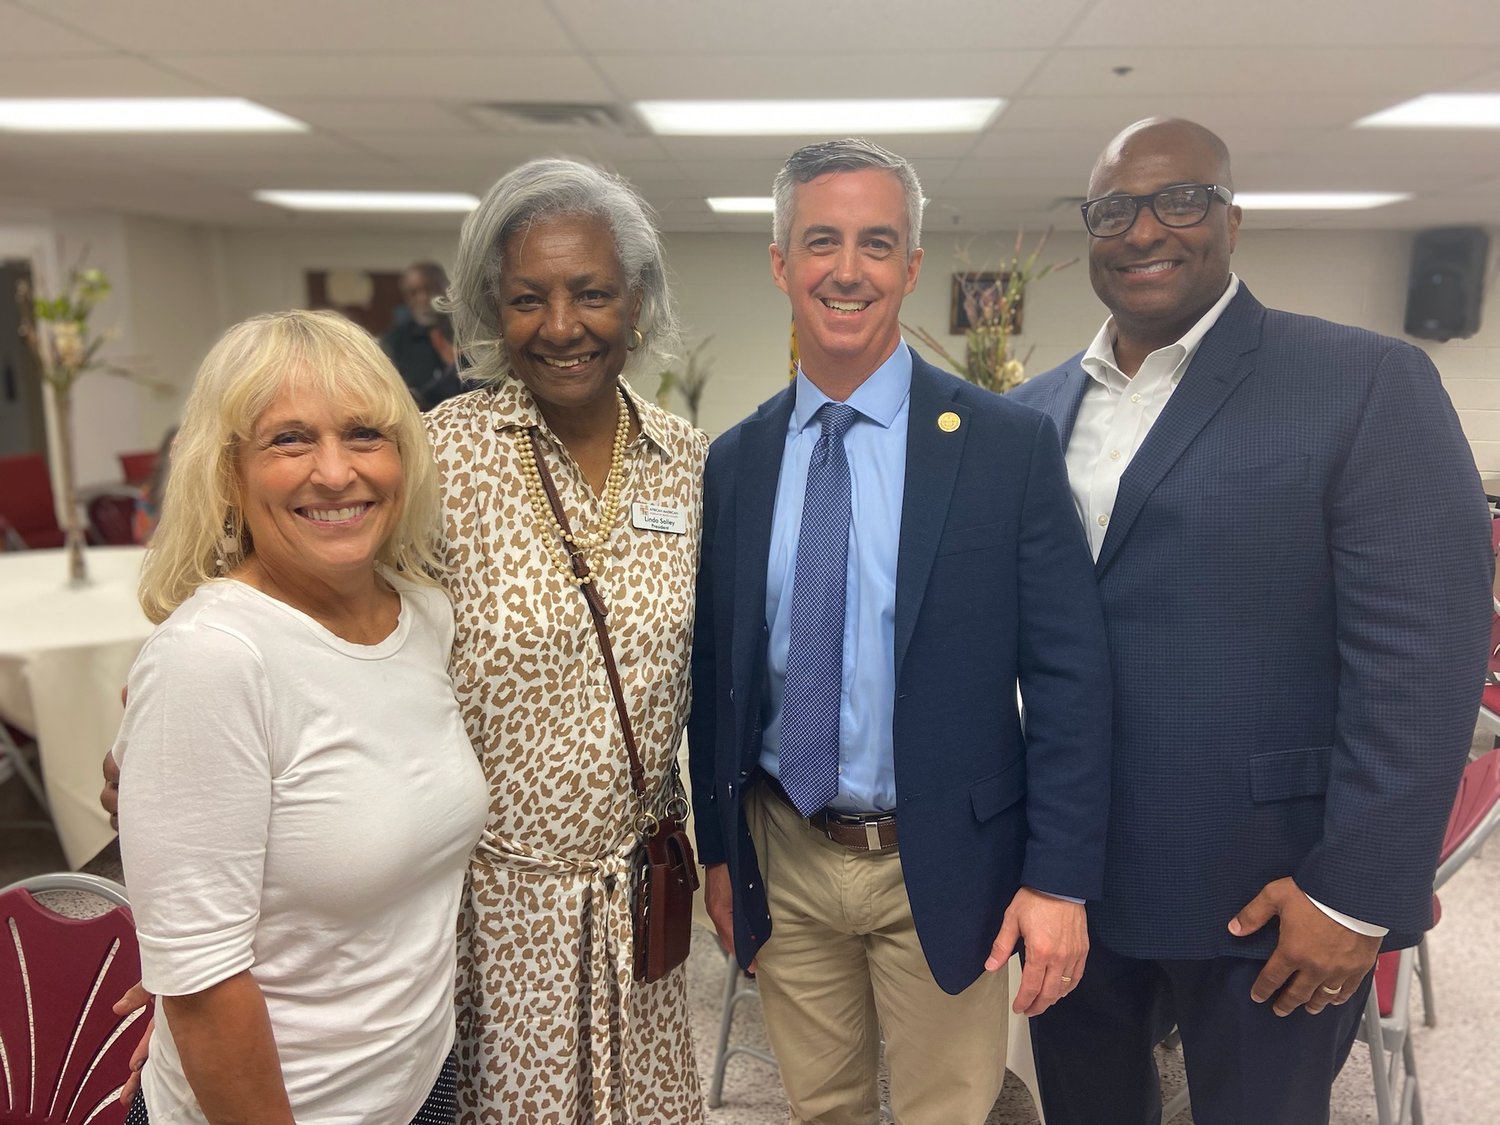 Bucks County Commissioners Diane Marseglia and Robert Harvie with Linda Salley and Bernard Briggs Jr., Bucks County Project and Diversity officer.